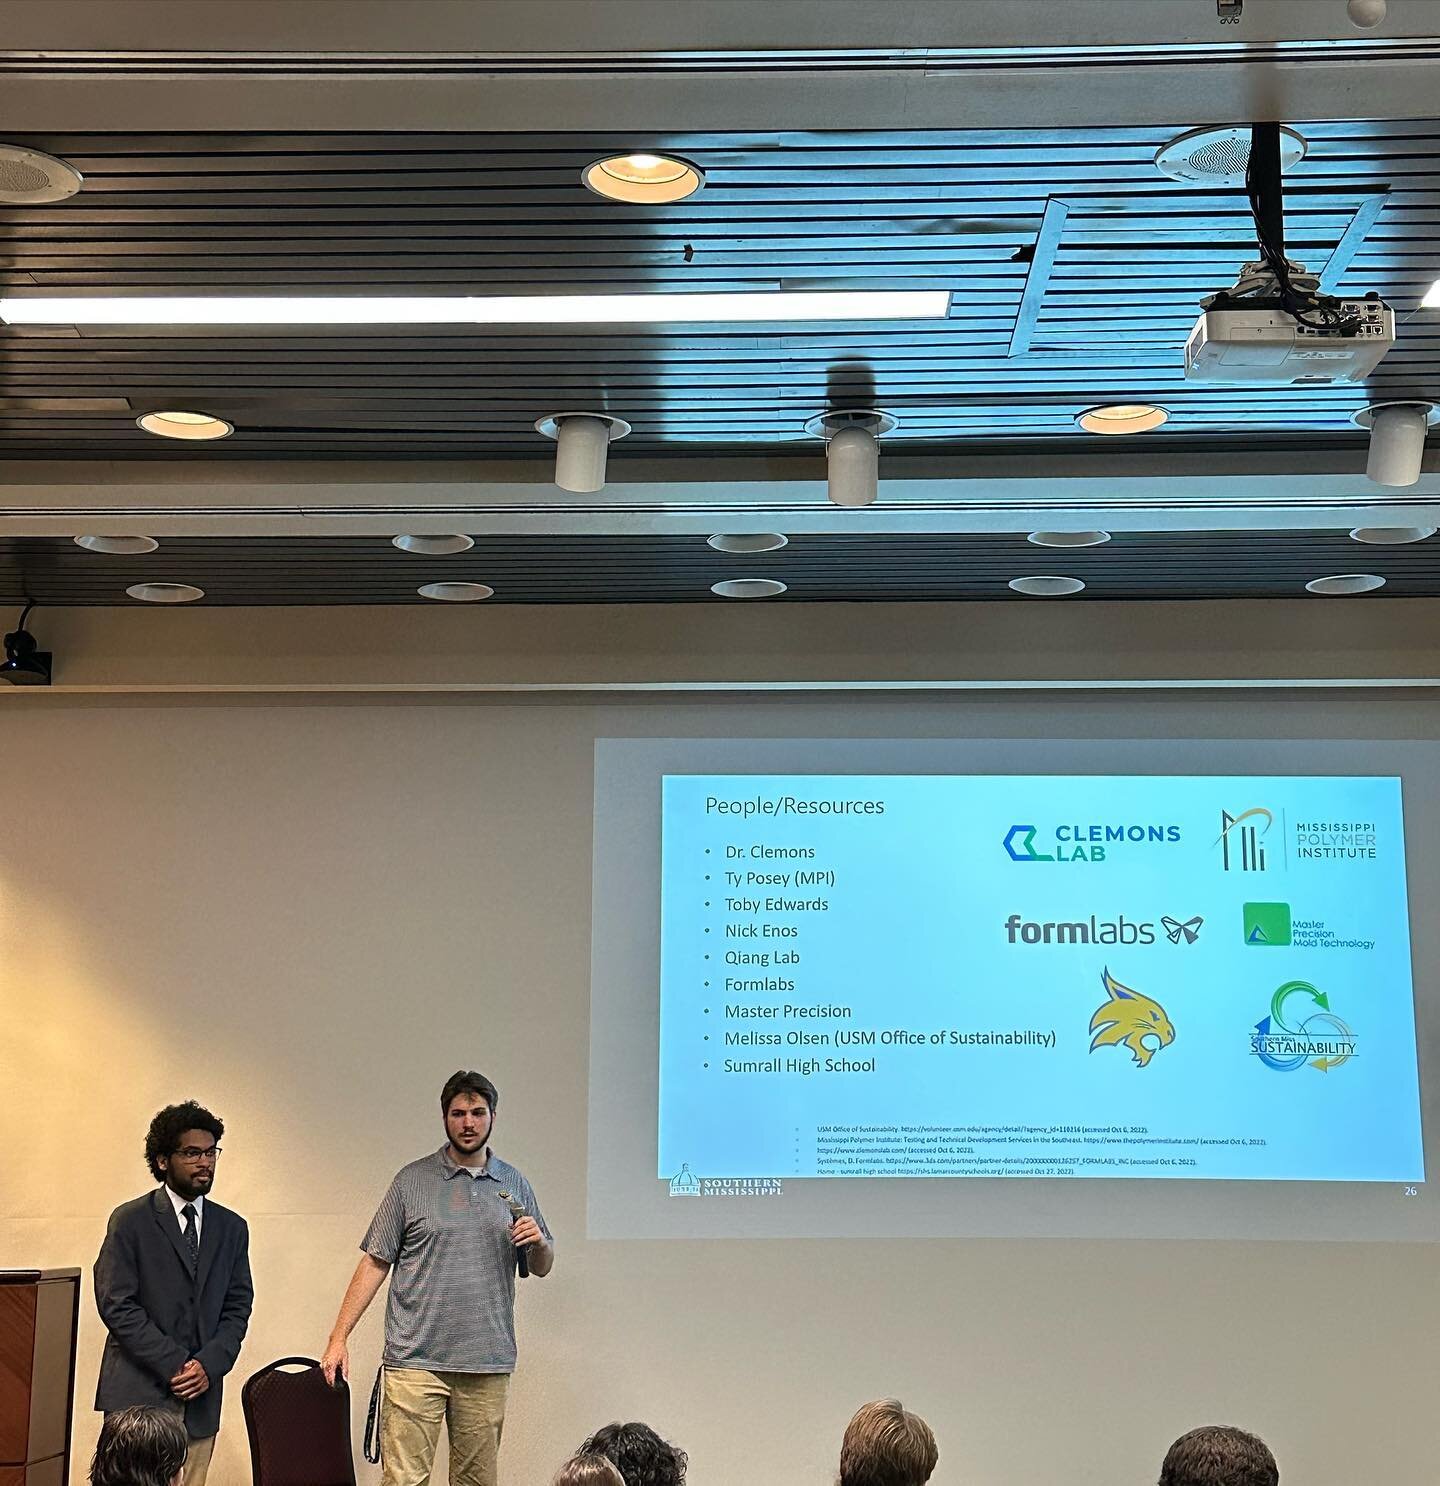 Team Shake N&rsquo; Bake presenting their Capstone project this morning! Justin and Larry were mentored by Dr. Clemons on their project &lsquo;Injection Molding with the Use of Recyclable Plastics and 3D Printing&rsquo;

Legends.